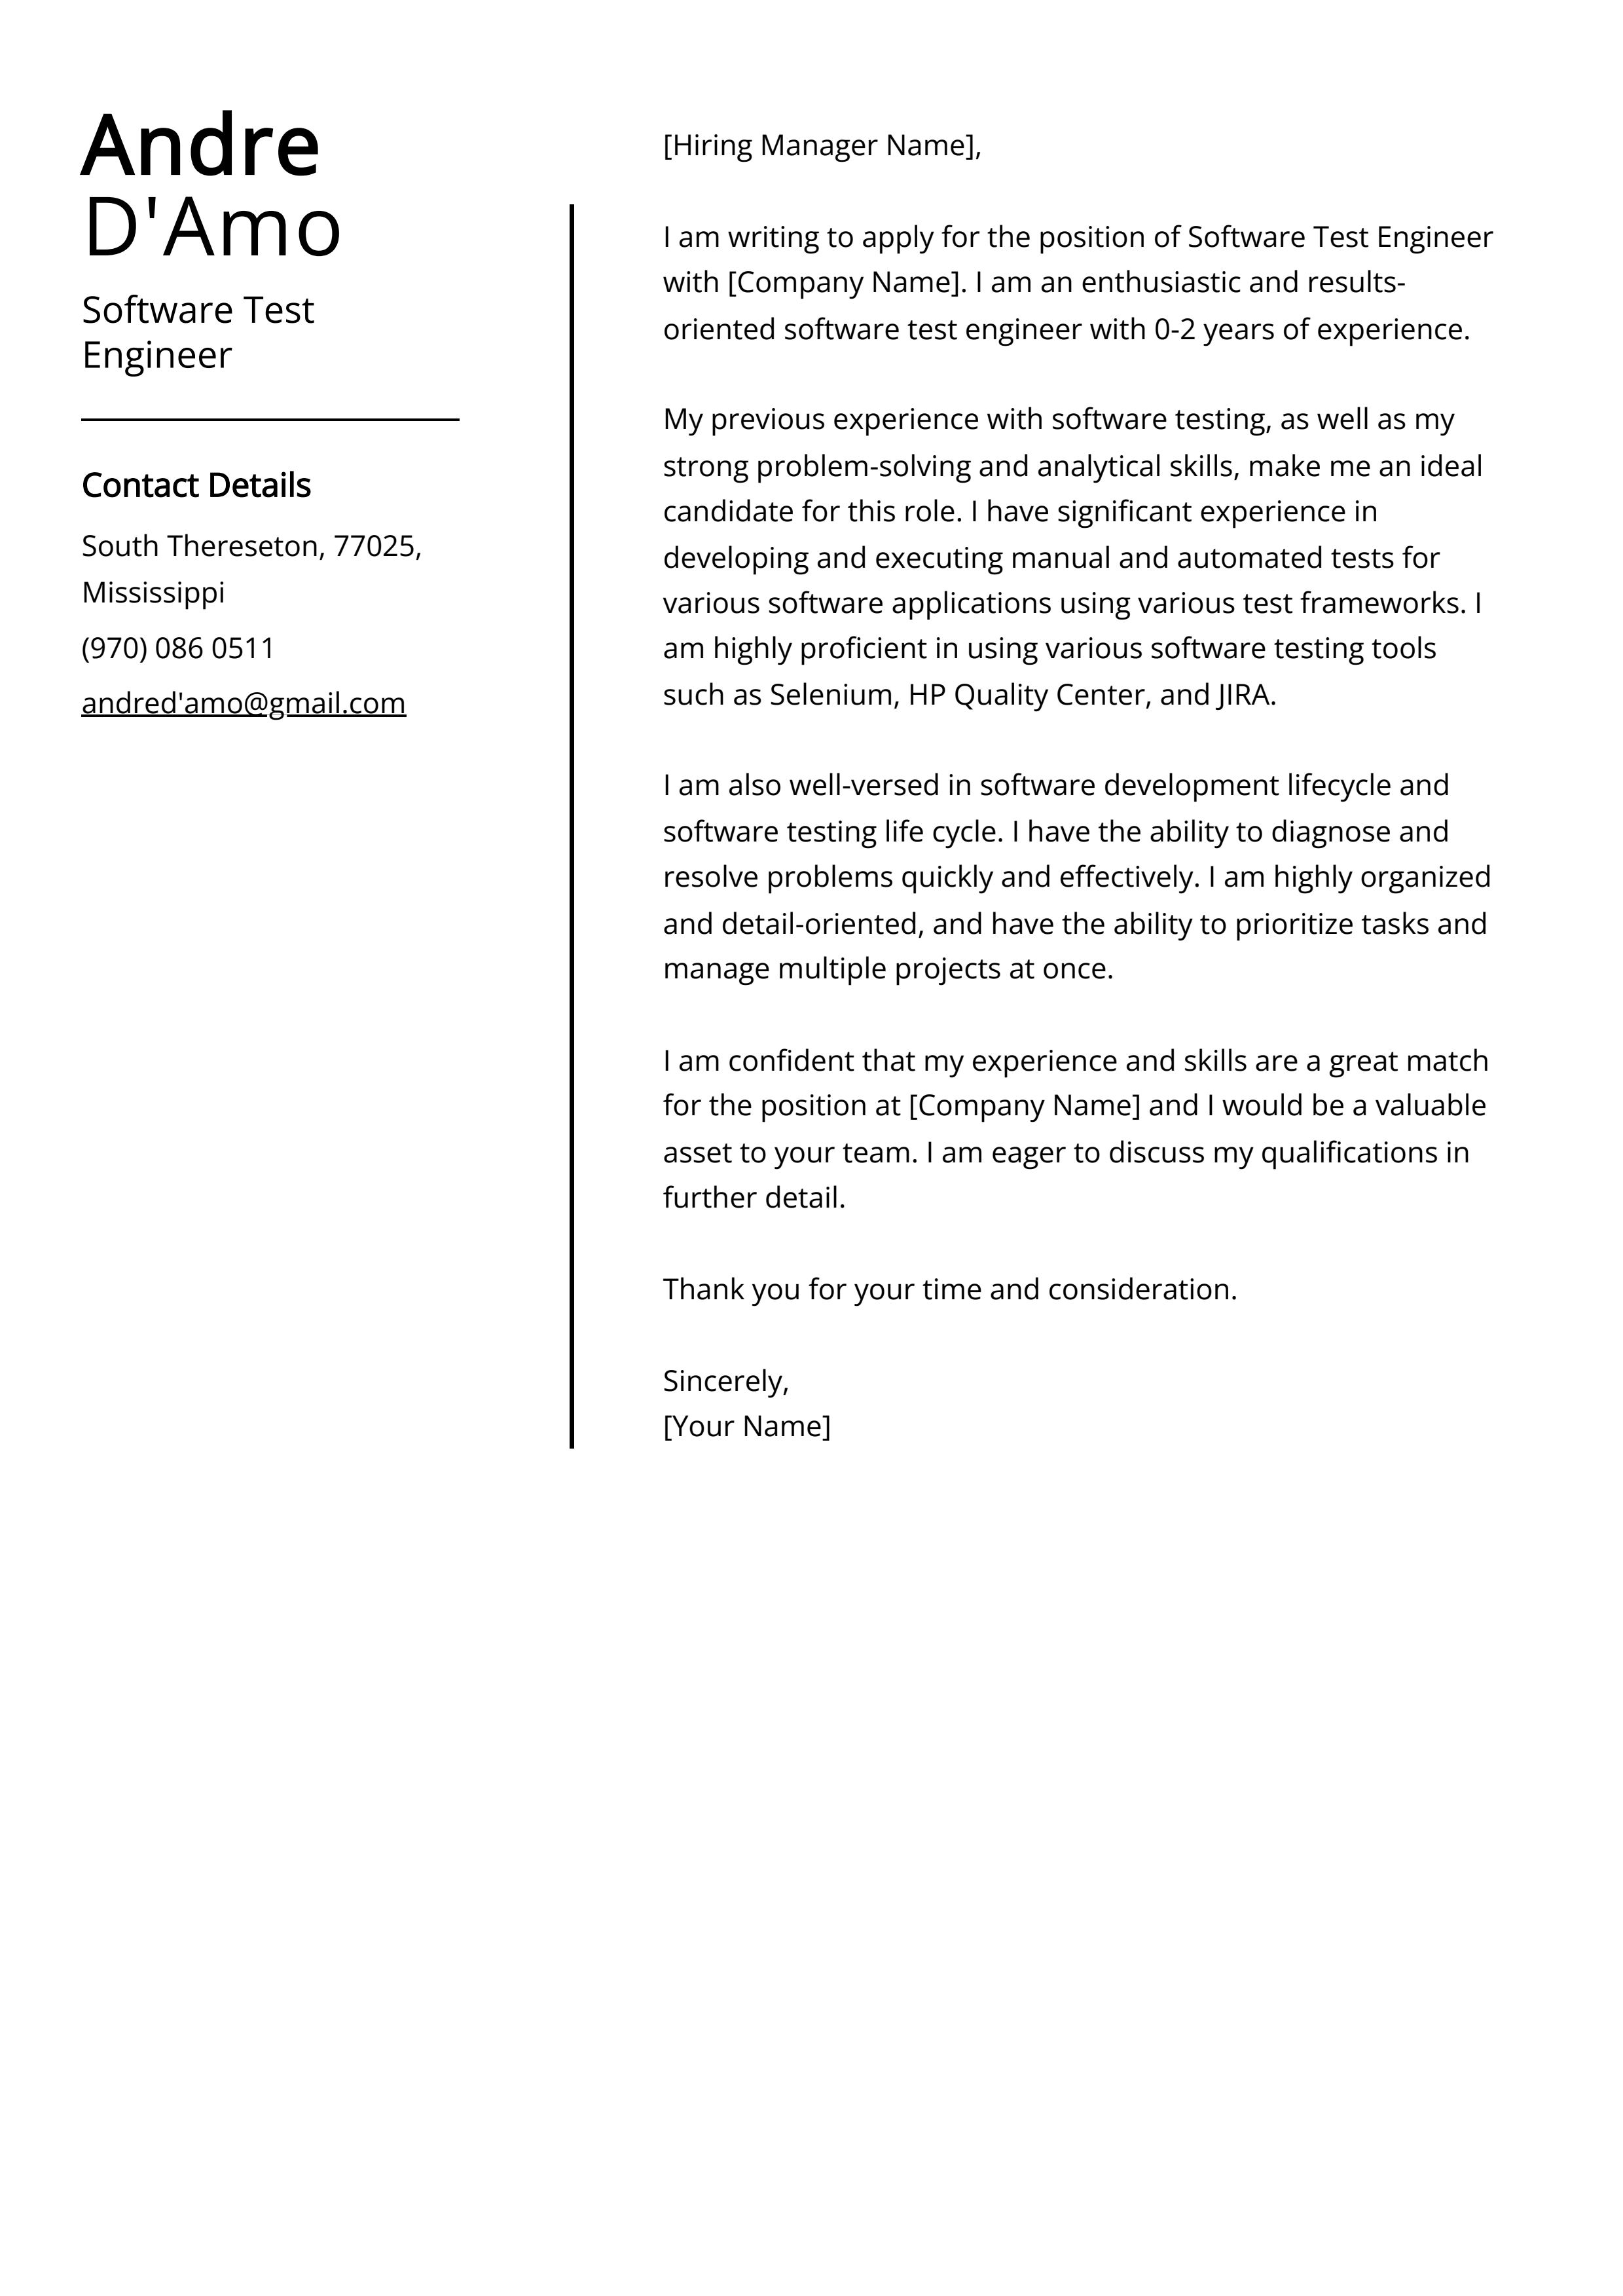 Software Test Engineer Cover Letter Example